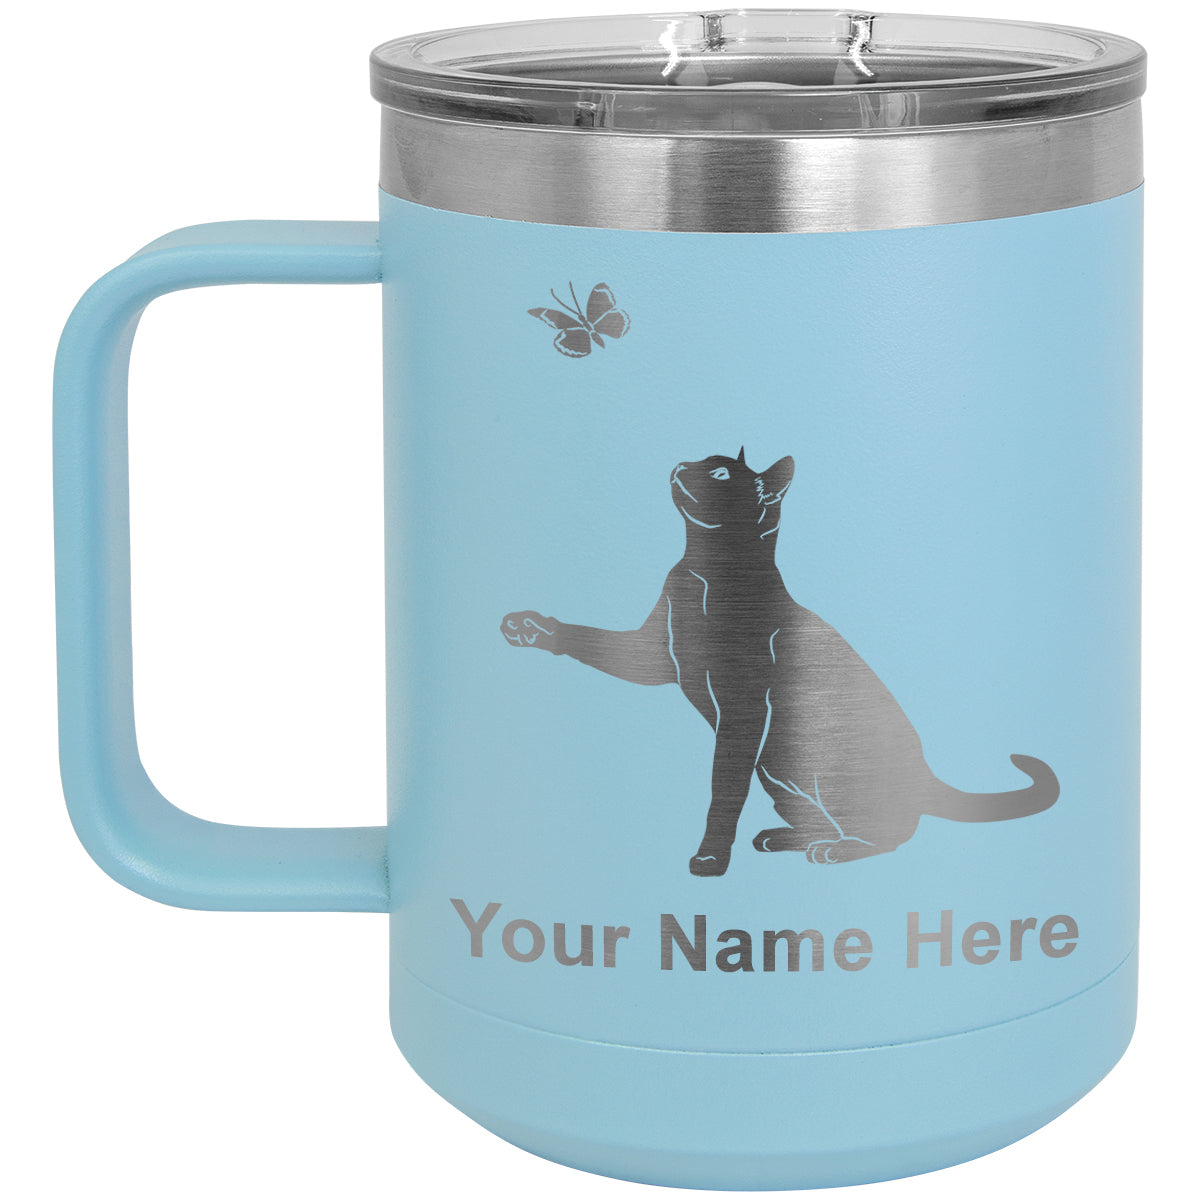 15oz Vacuum Insulated Coffee Mug, Cat with Butterfly, Personalized Engraving Included